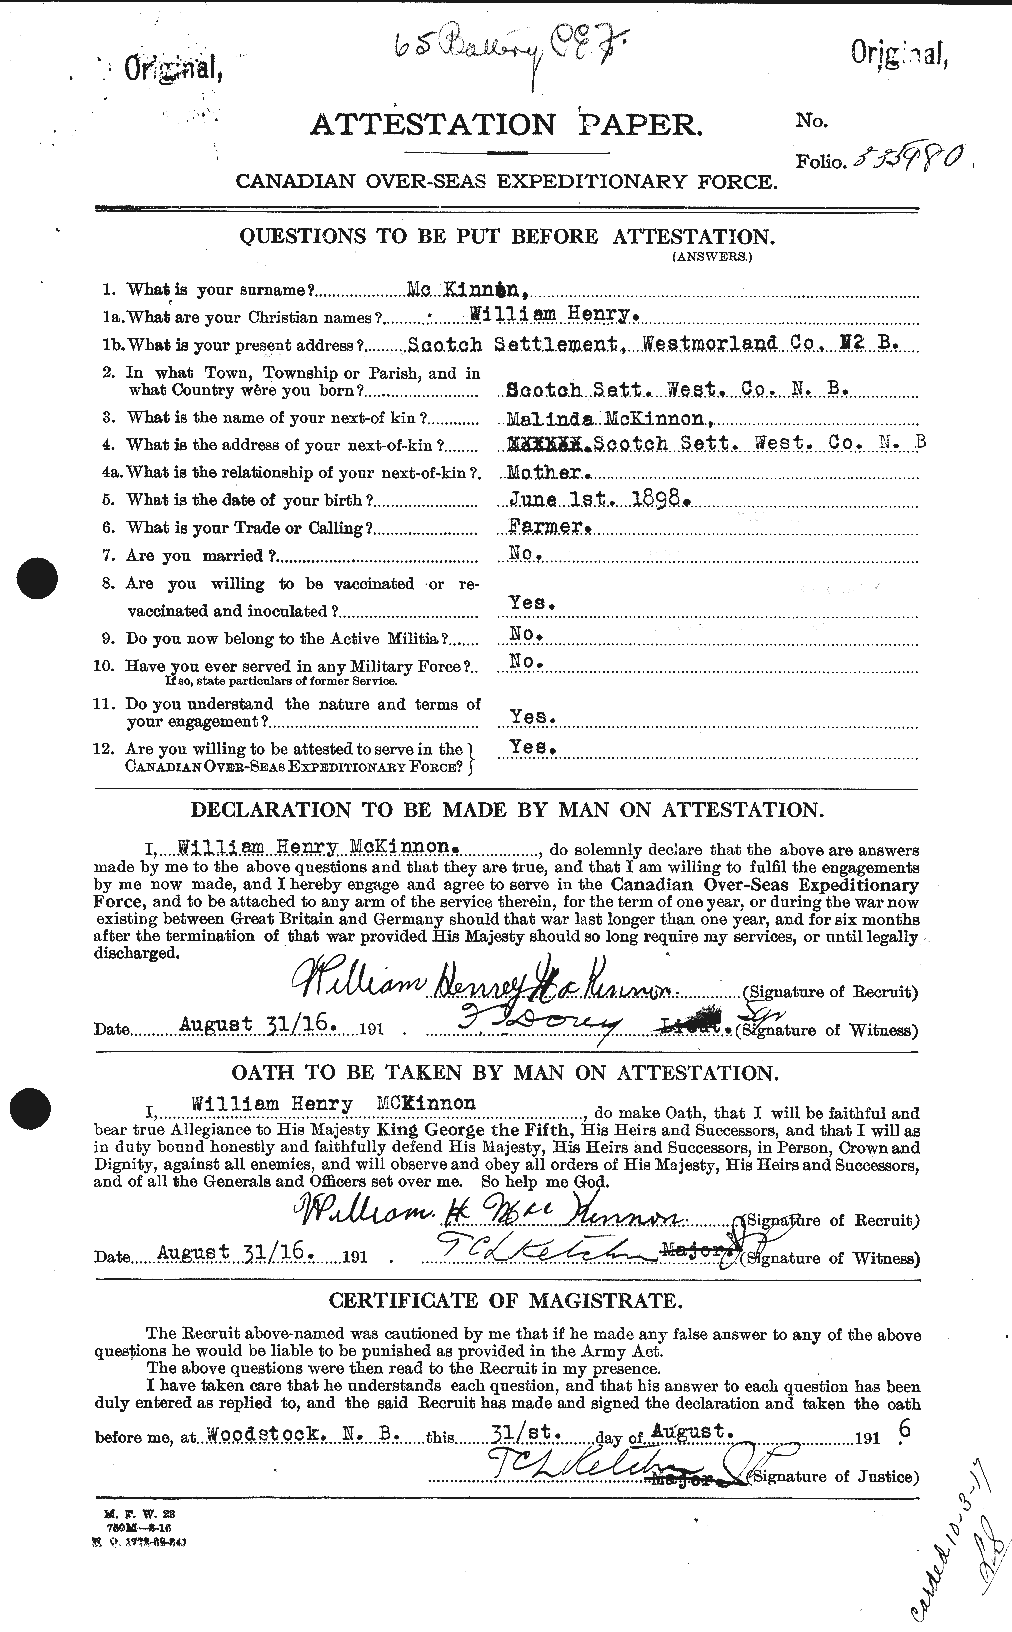 Personnel Records of the First World War - CEF 534329a